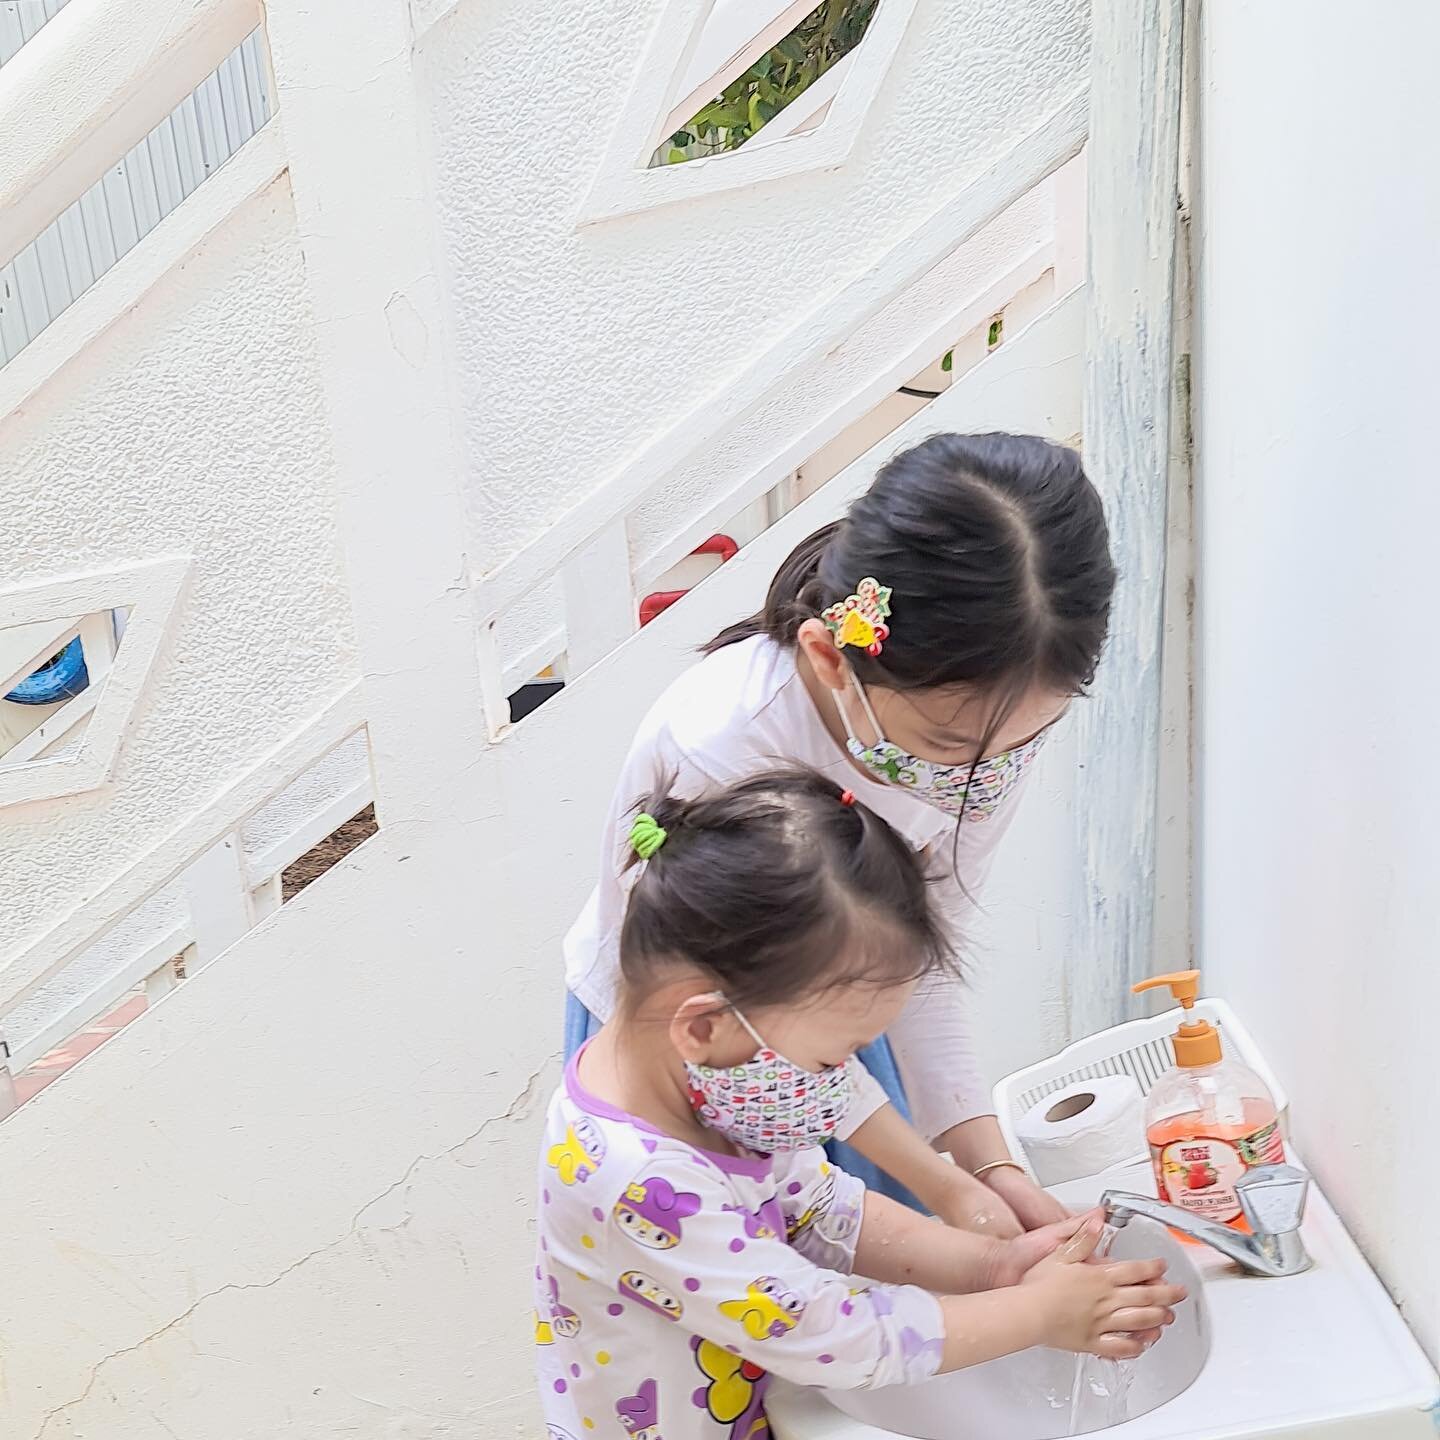 It&rsquo;s our first day back in school! We&rsquo;re excited to welcome familiar faces. 🥰 At The Giving Tree International School, we have established a culture of hand hygiene. Everyone washed their hands before entering the campus, and at key time